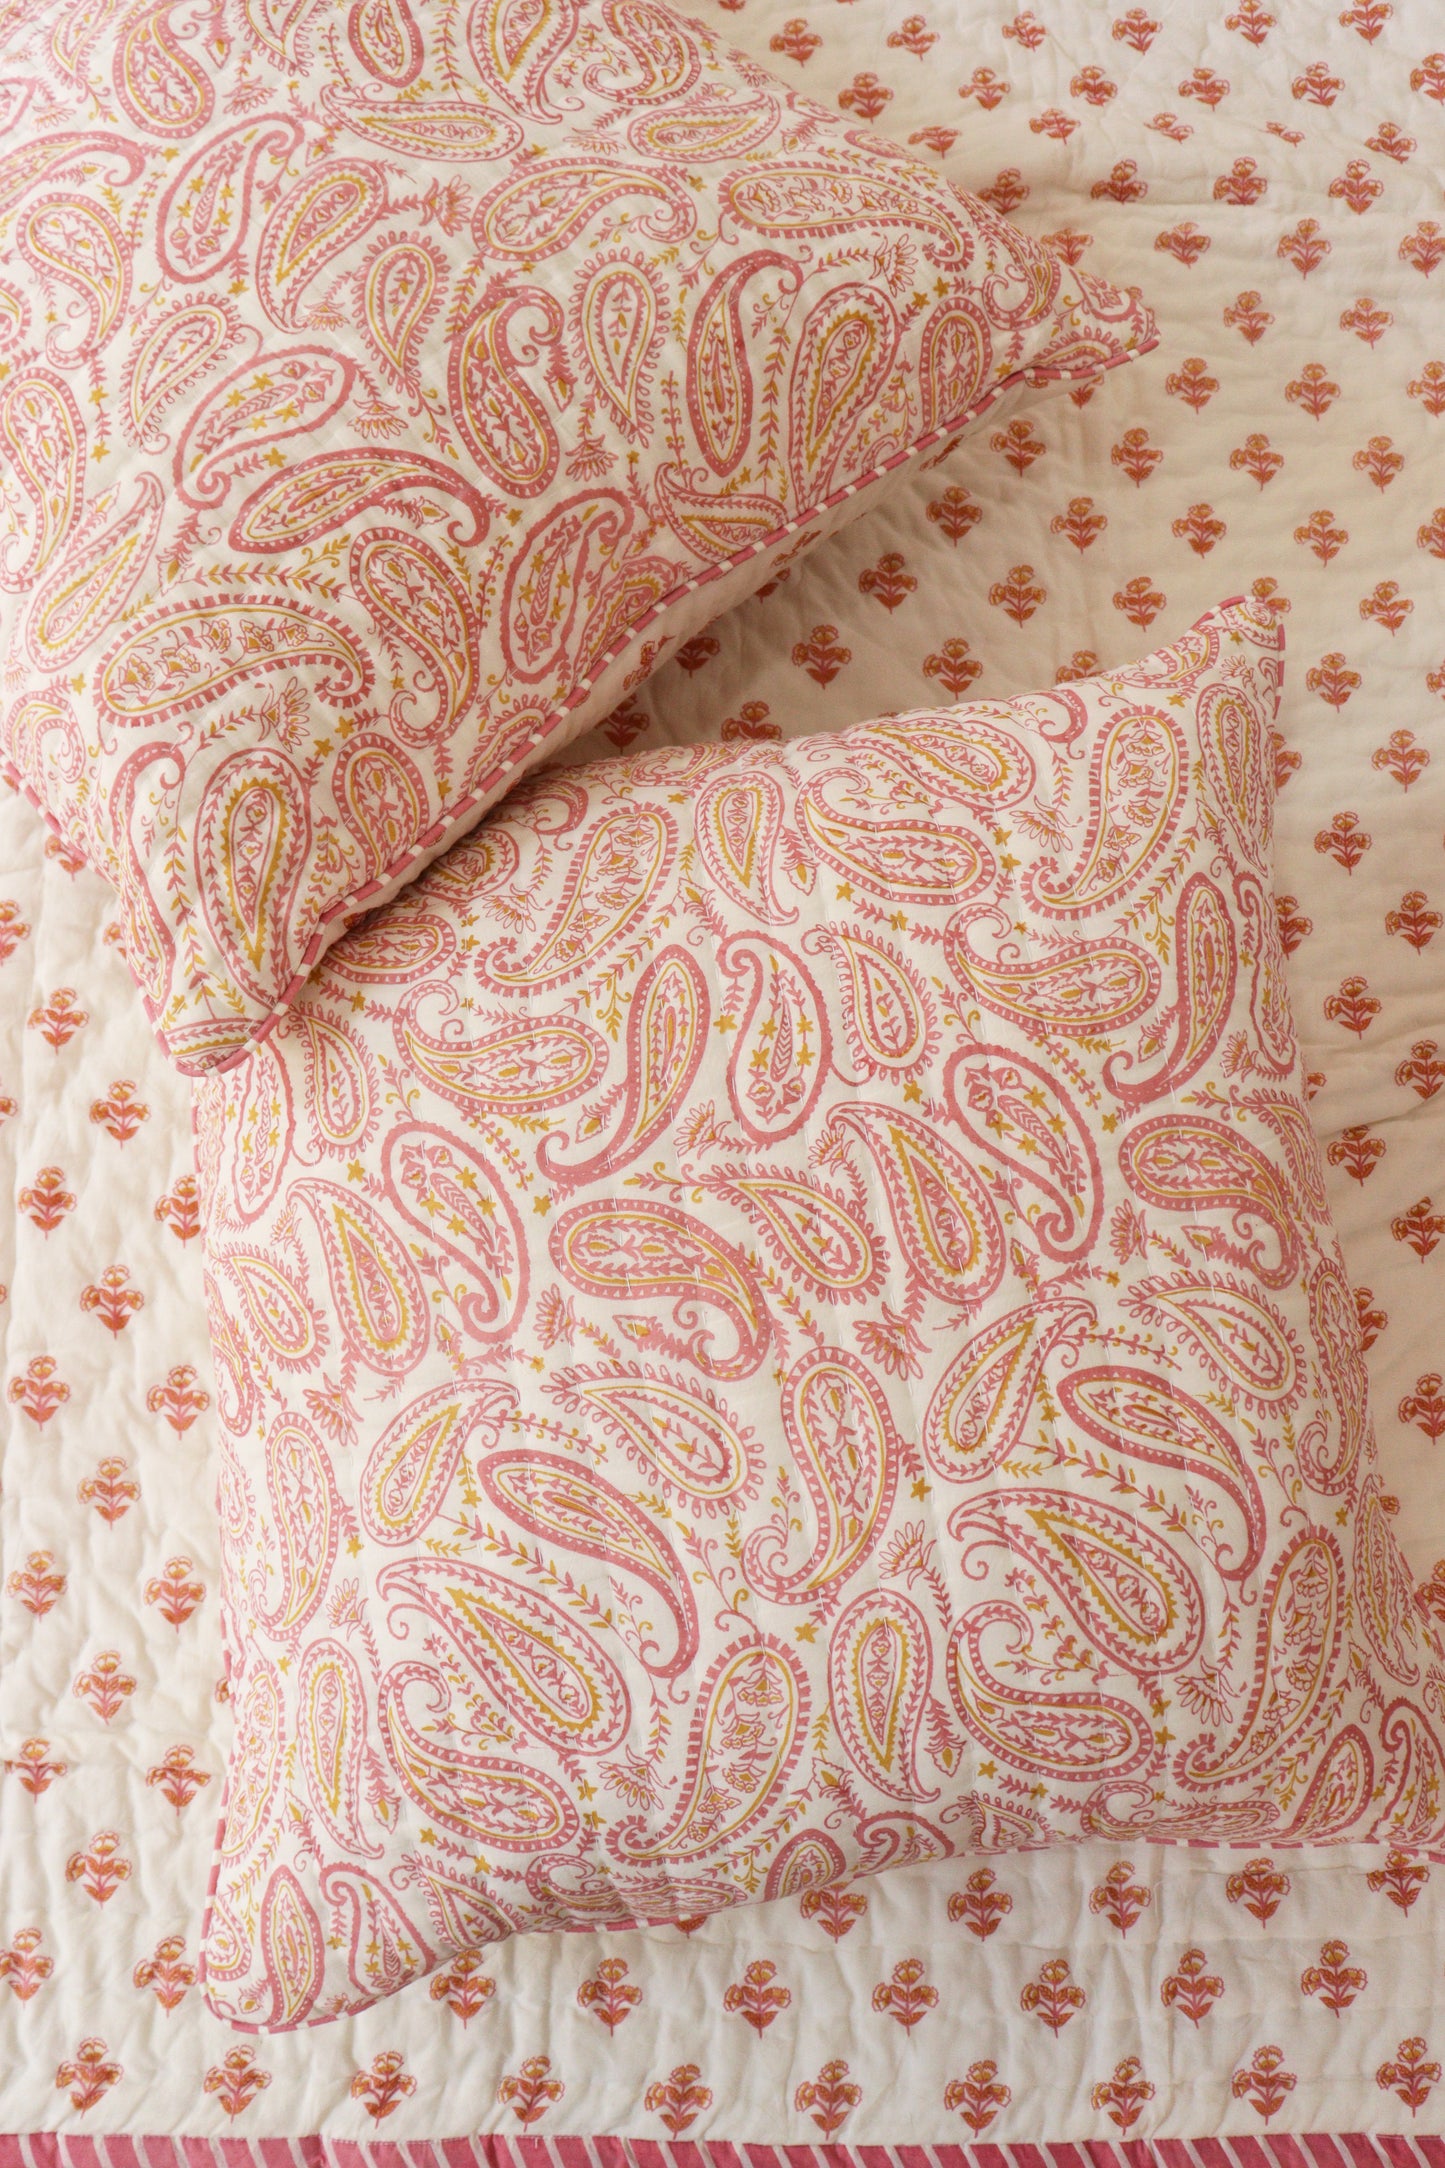 Pink Paisley Reversible Cushion Cover (24 ☓ 24 inch)